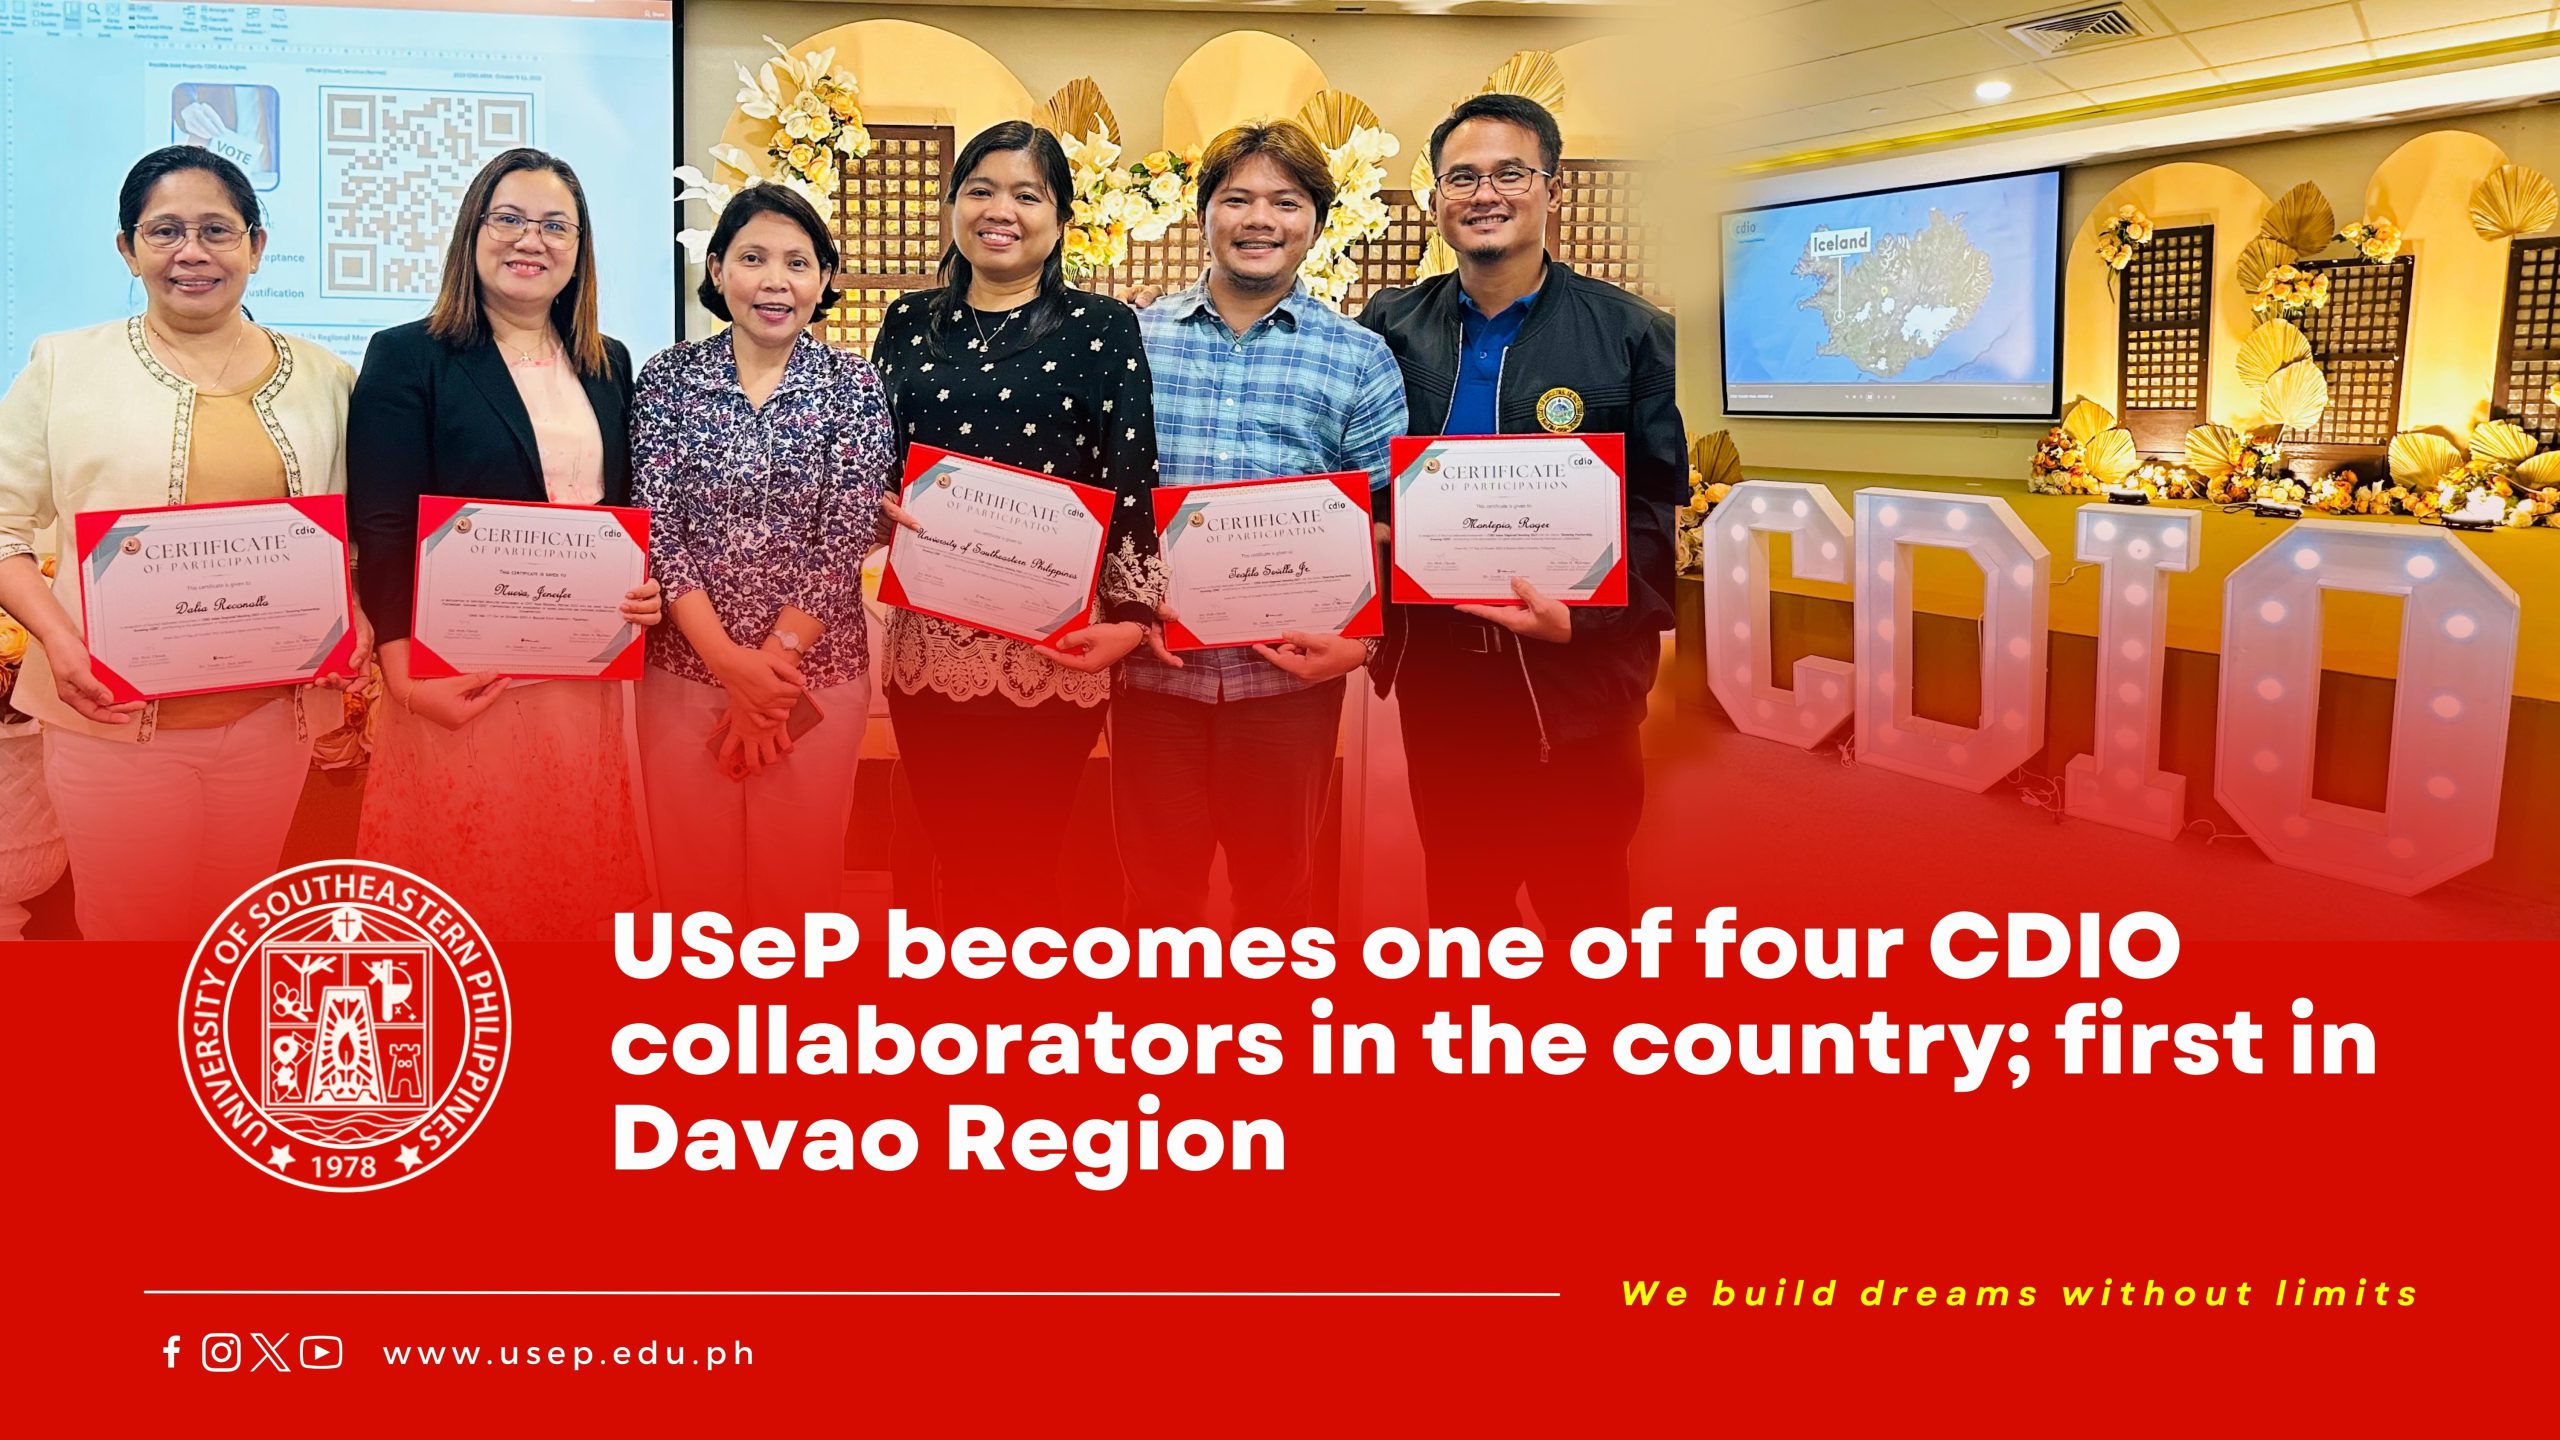 USeP becomes one of four CDIO collaborators in the country; first in Davao Region